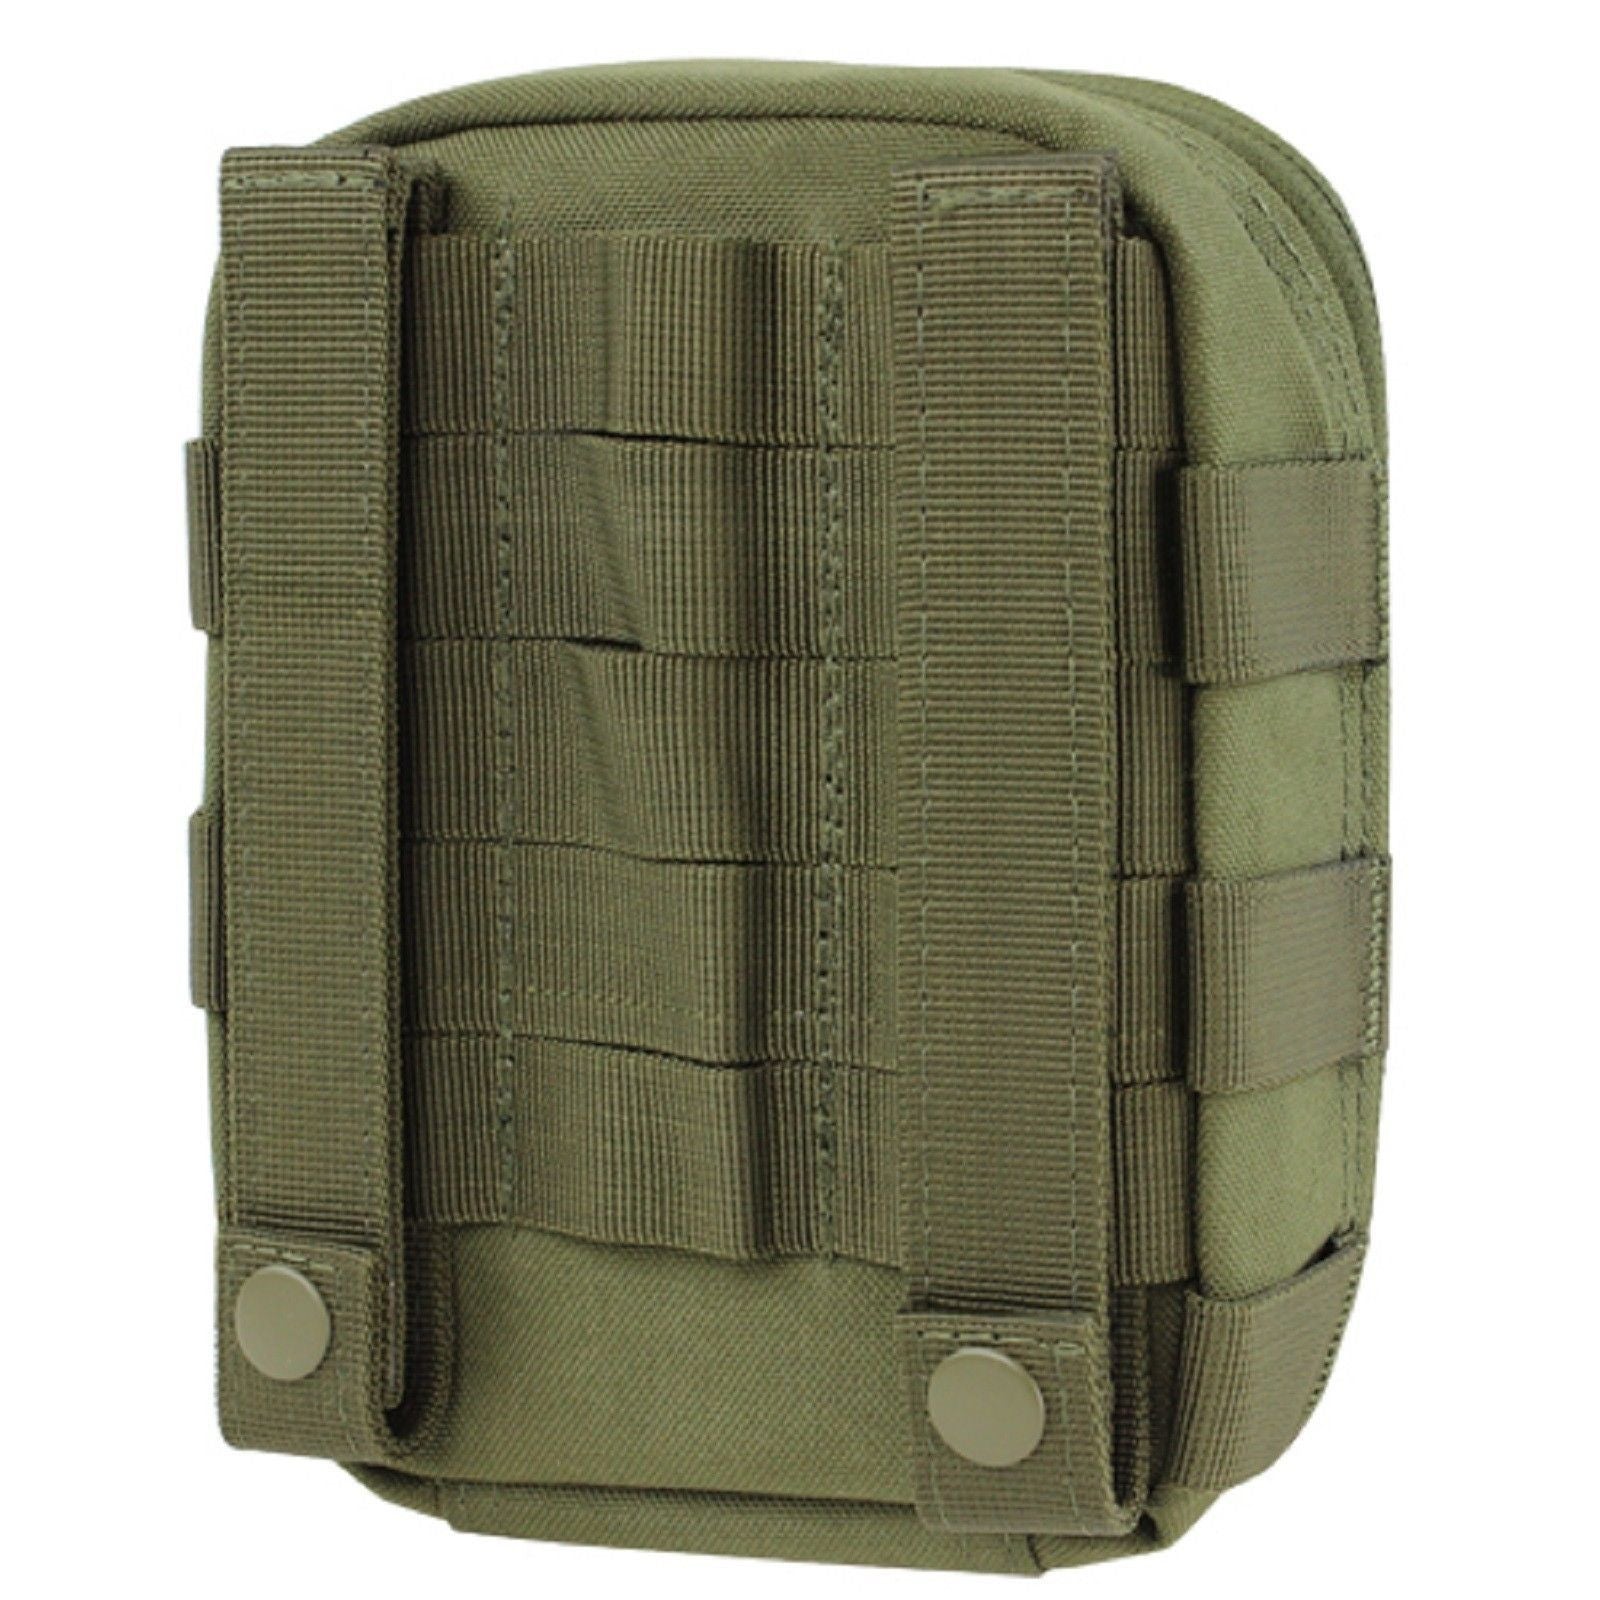 Condor Outdoor Olive Drab Green Sidekick Utility Pouch Tactical Molle